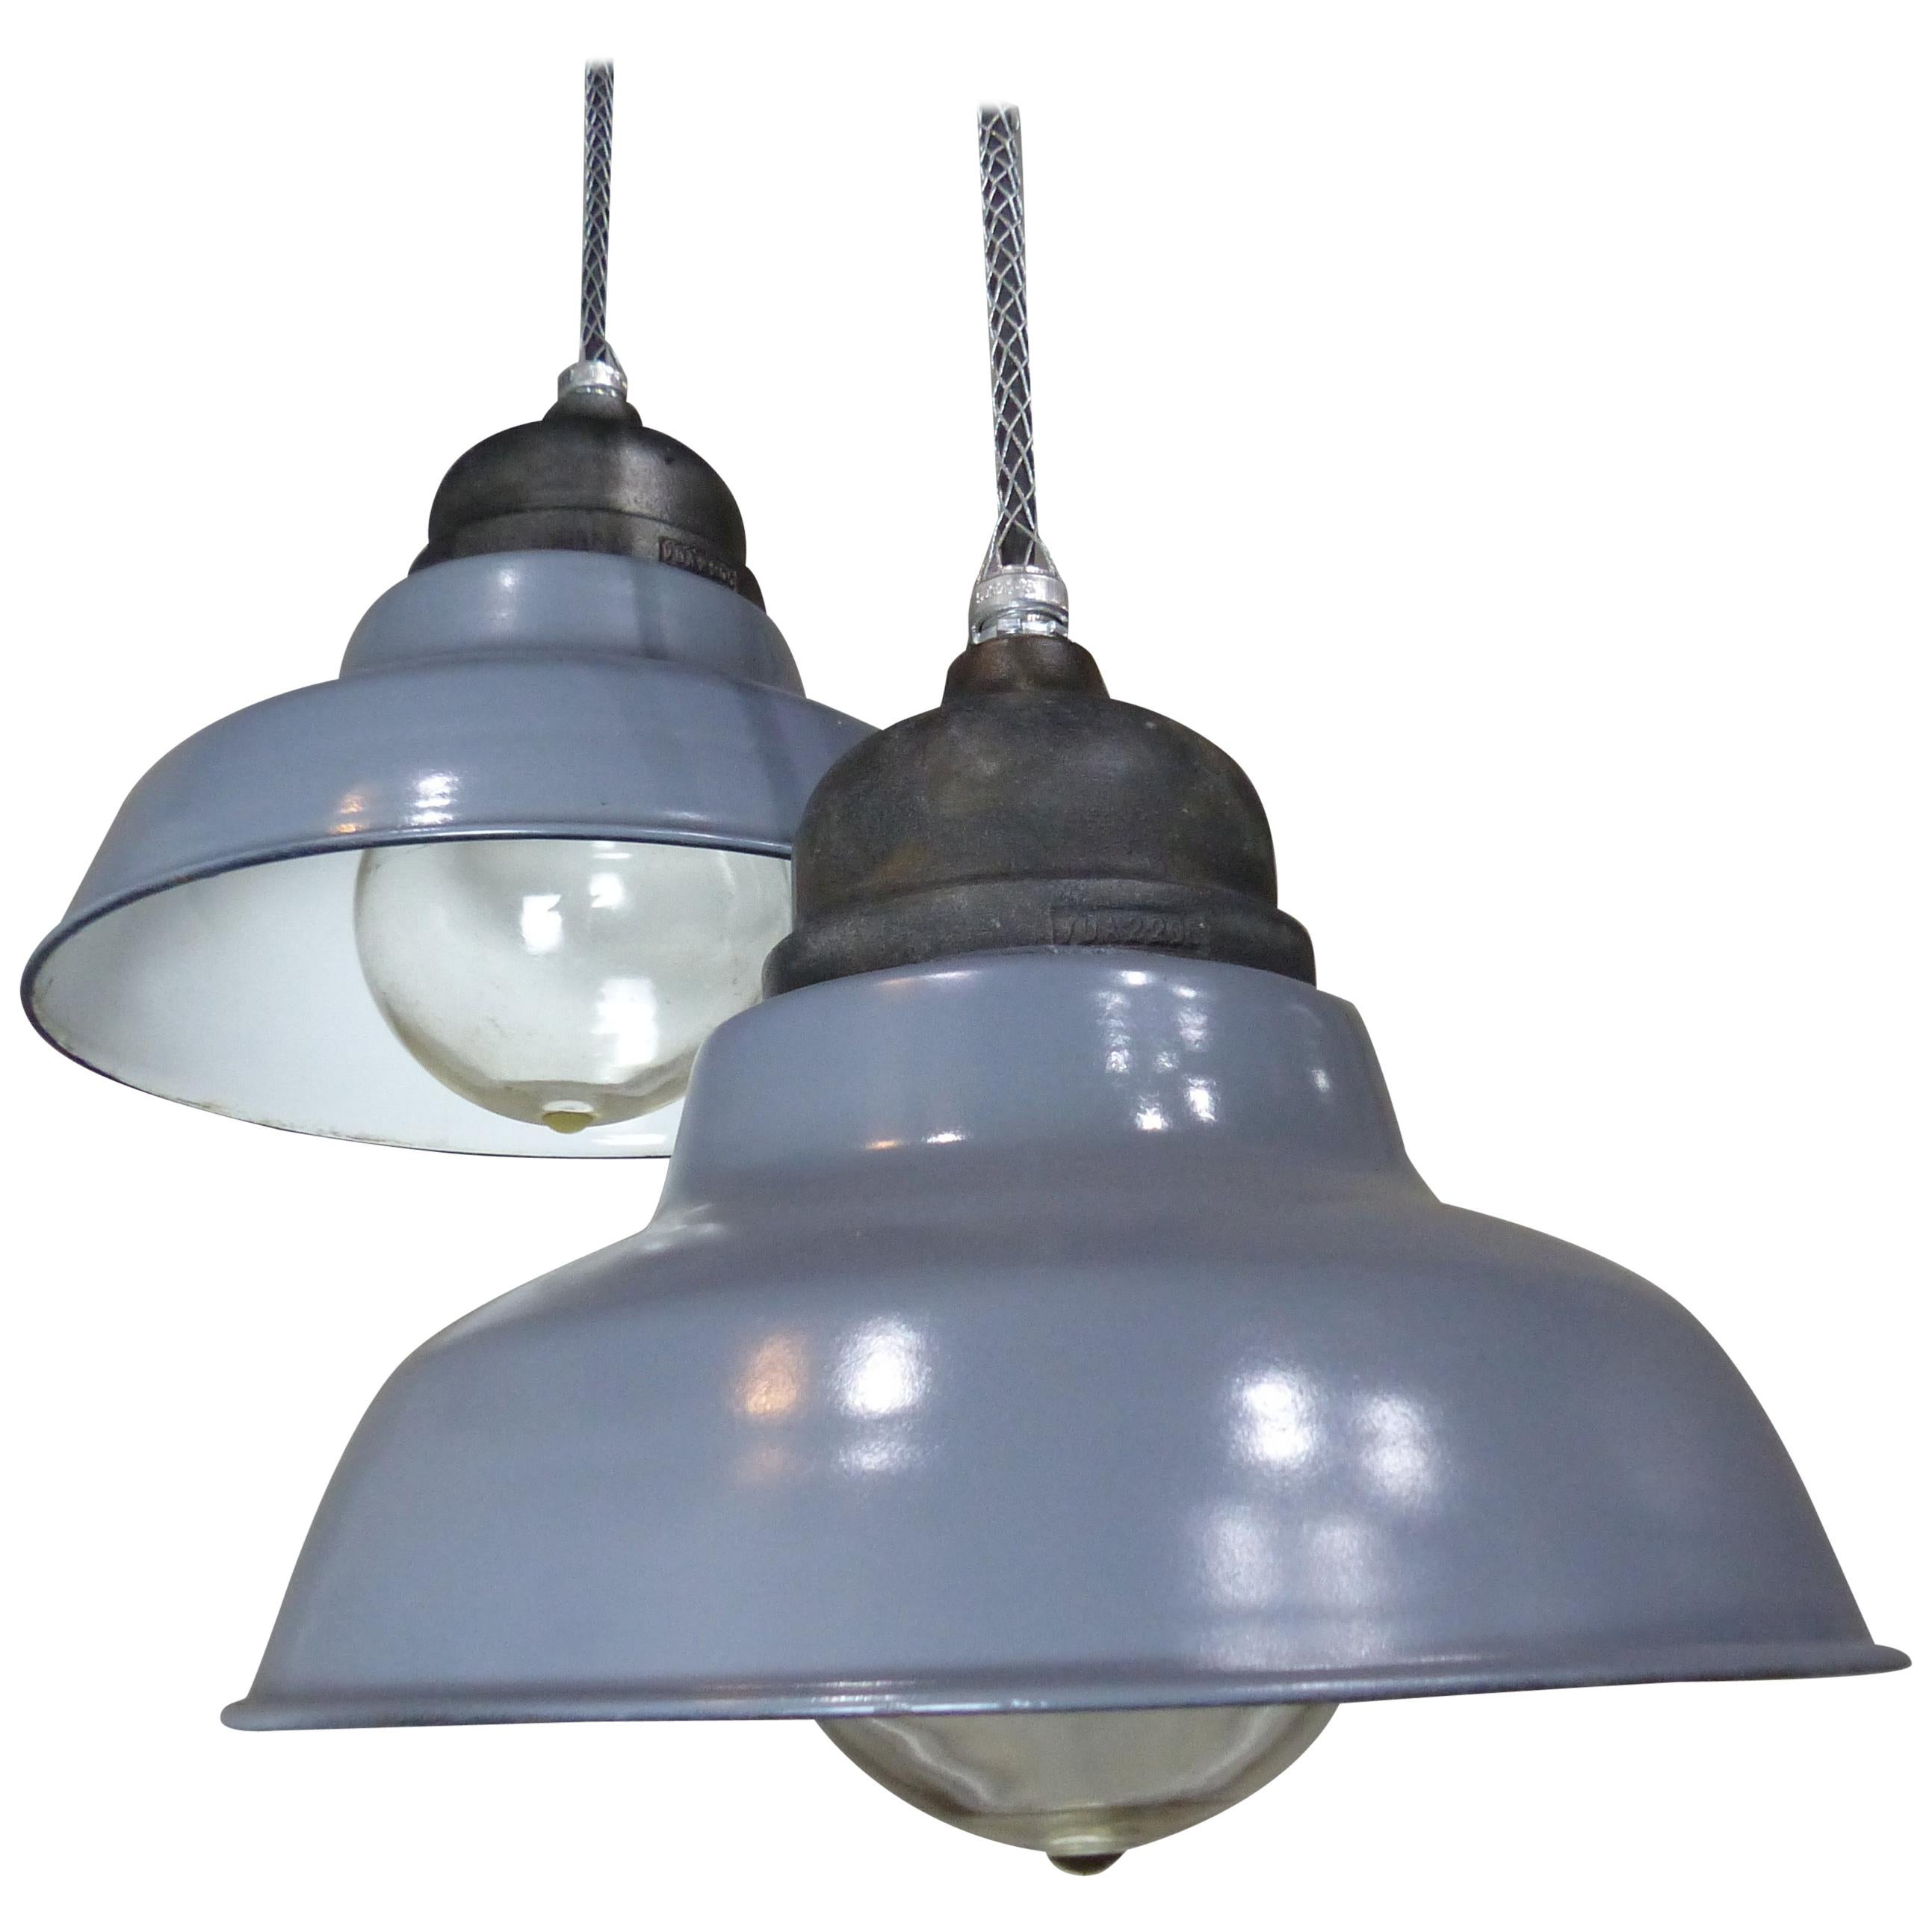 1930 Industrial Crouse Hinds Pendant Lights